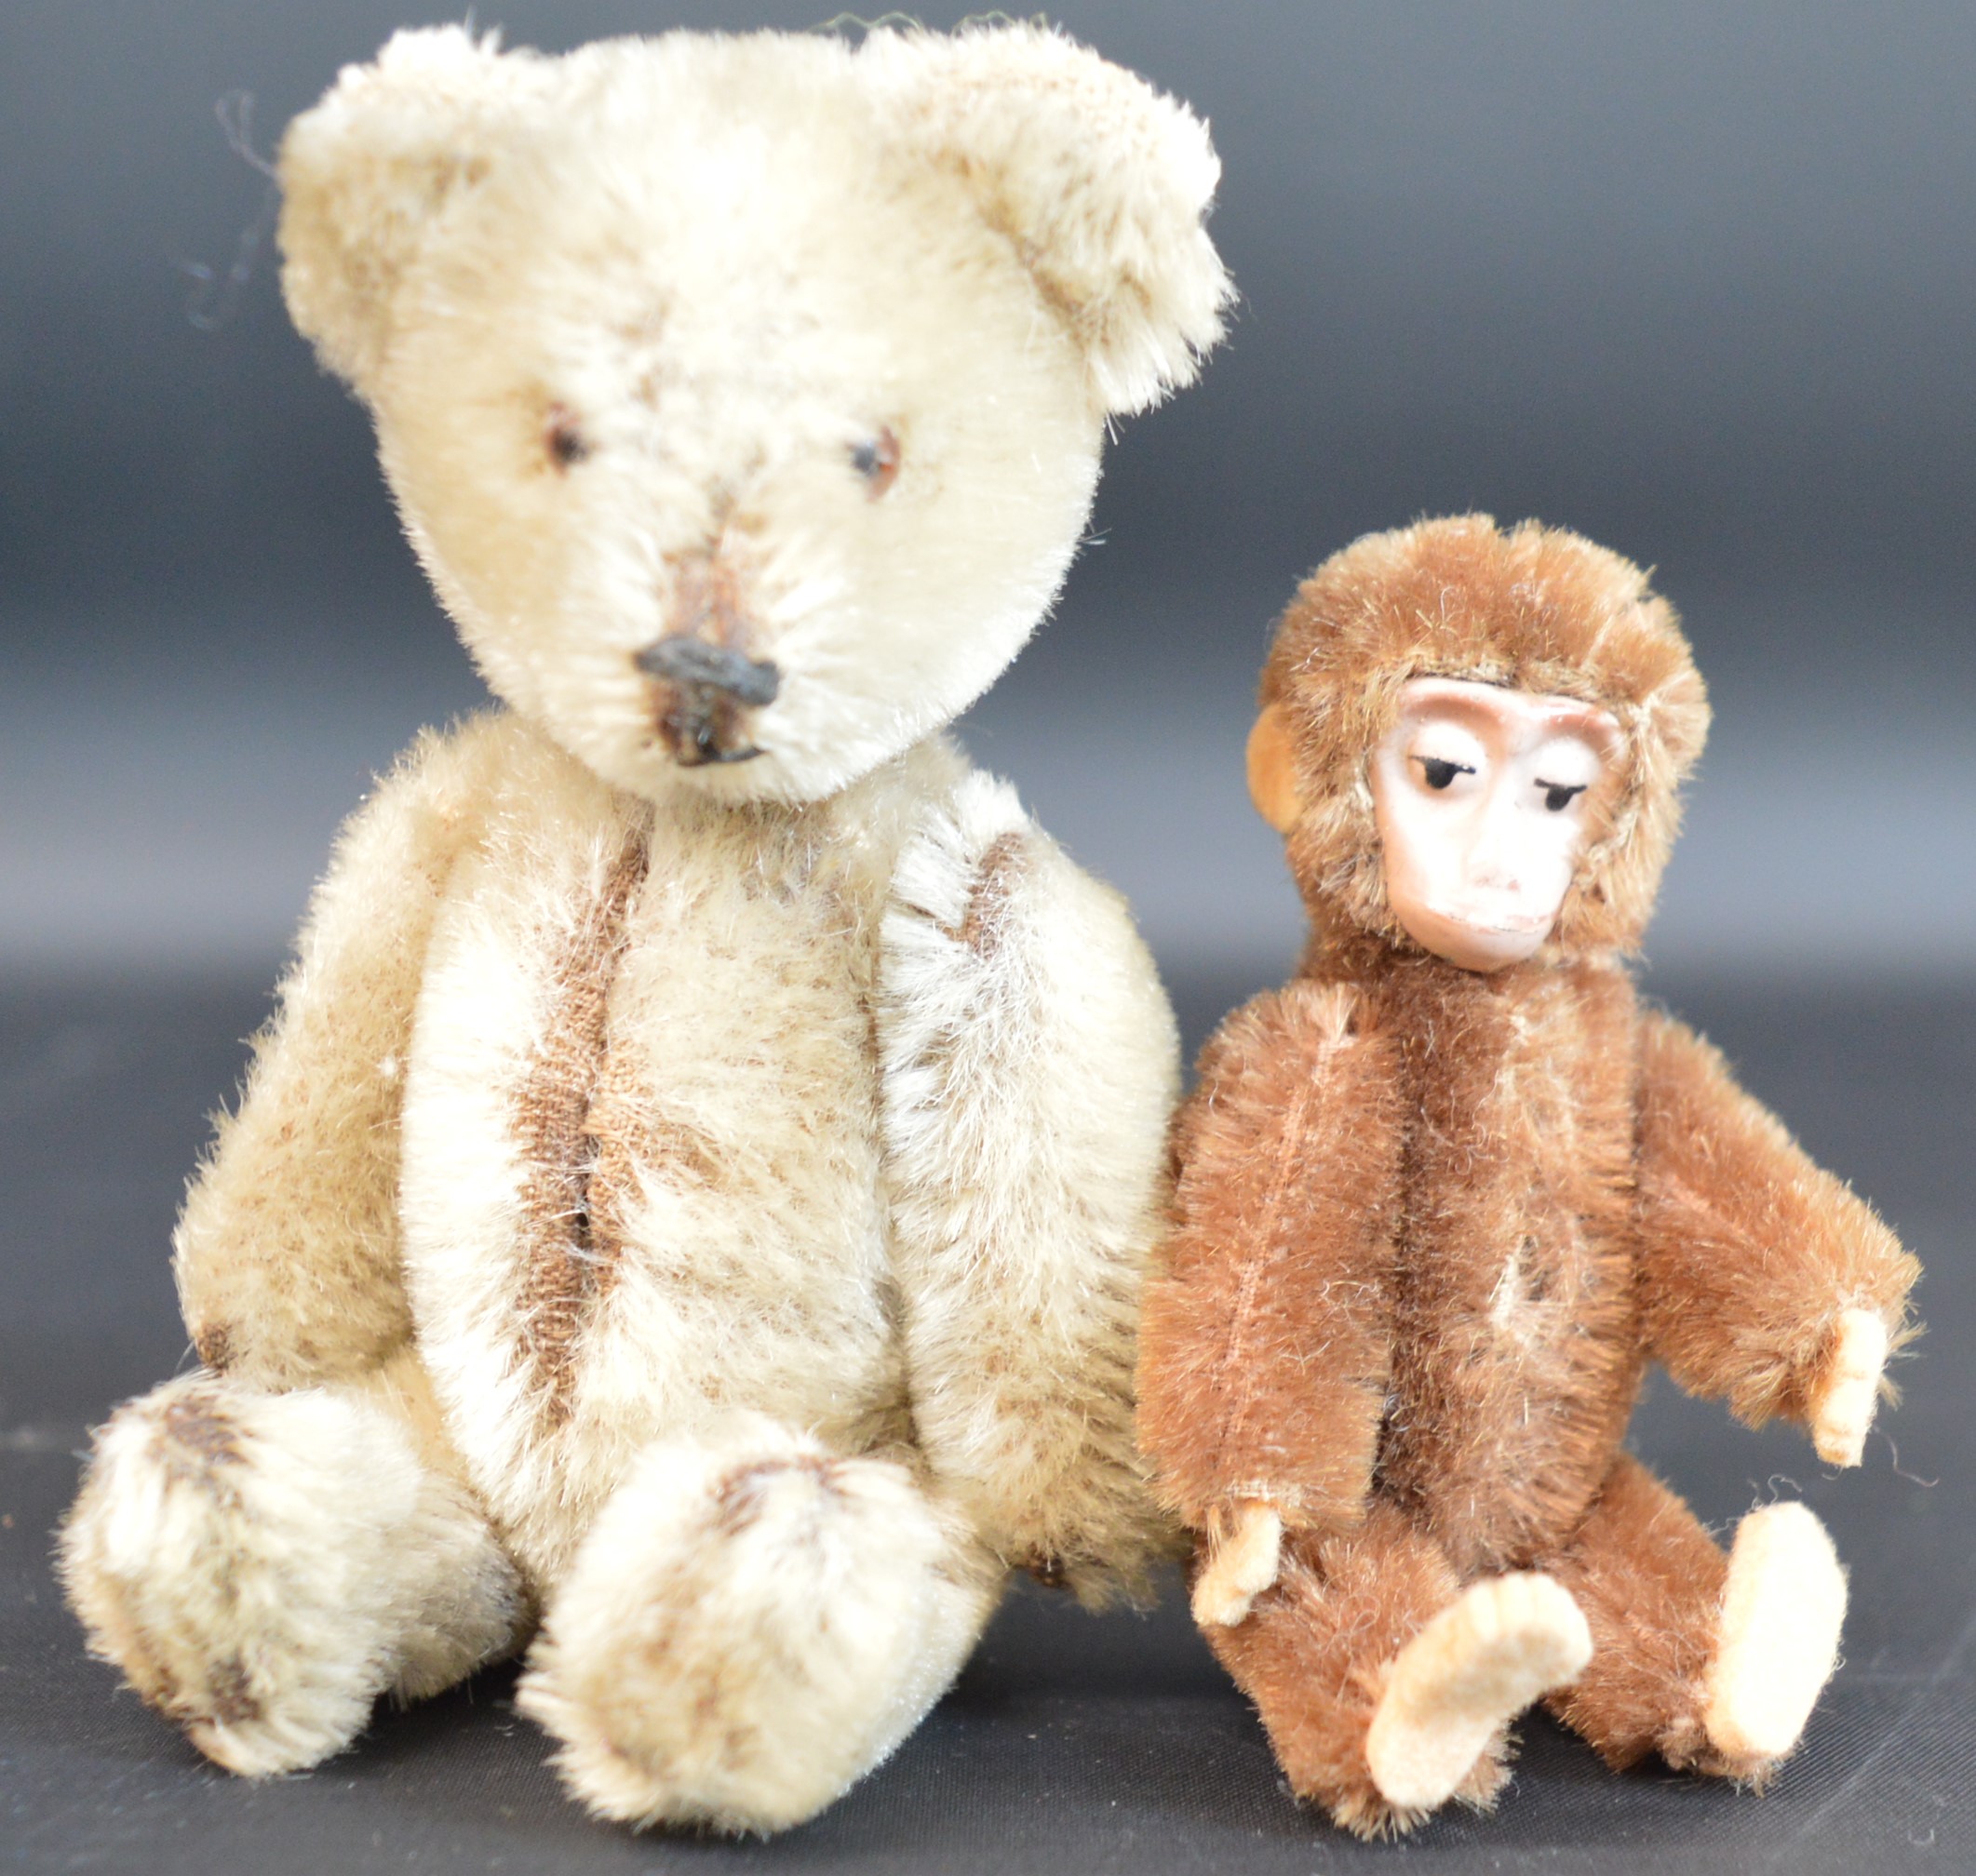 Attributed to Schuco miniature "Yes No" mohair Teddy Bear 13cm high & monkey 9cm high (possibly